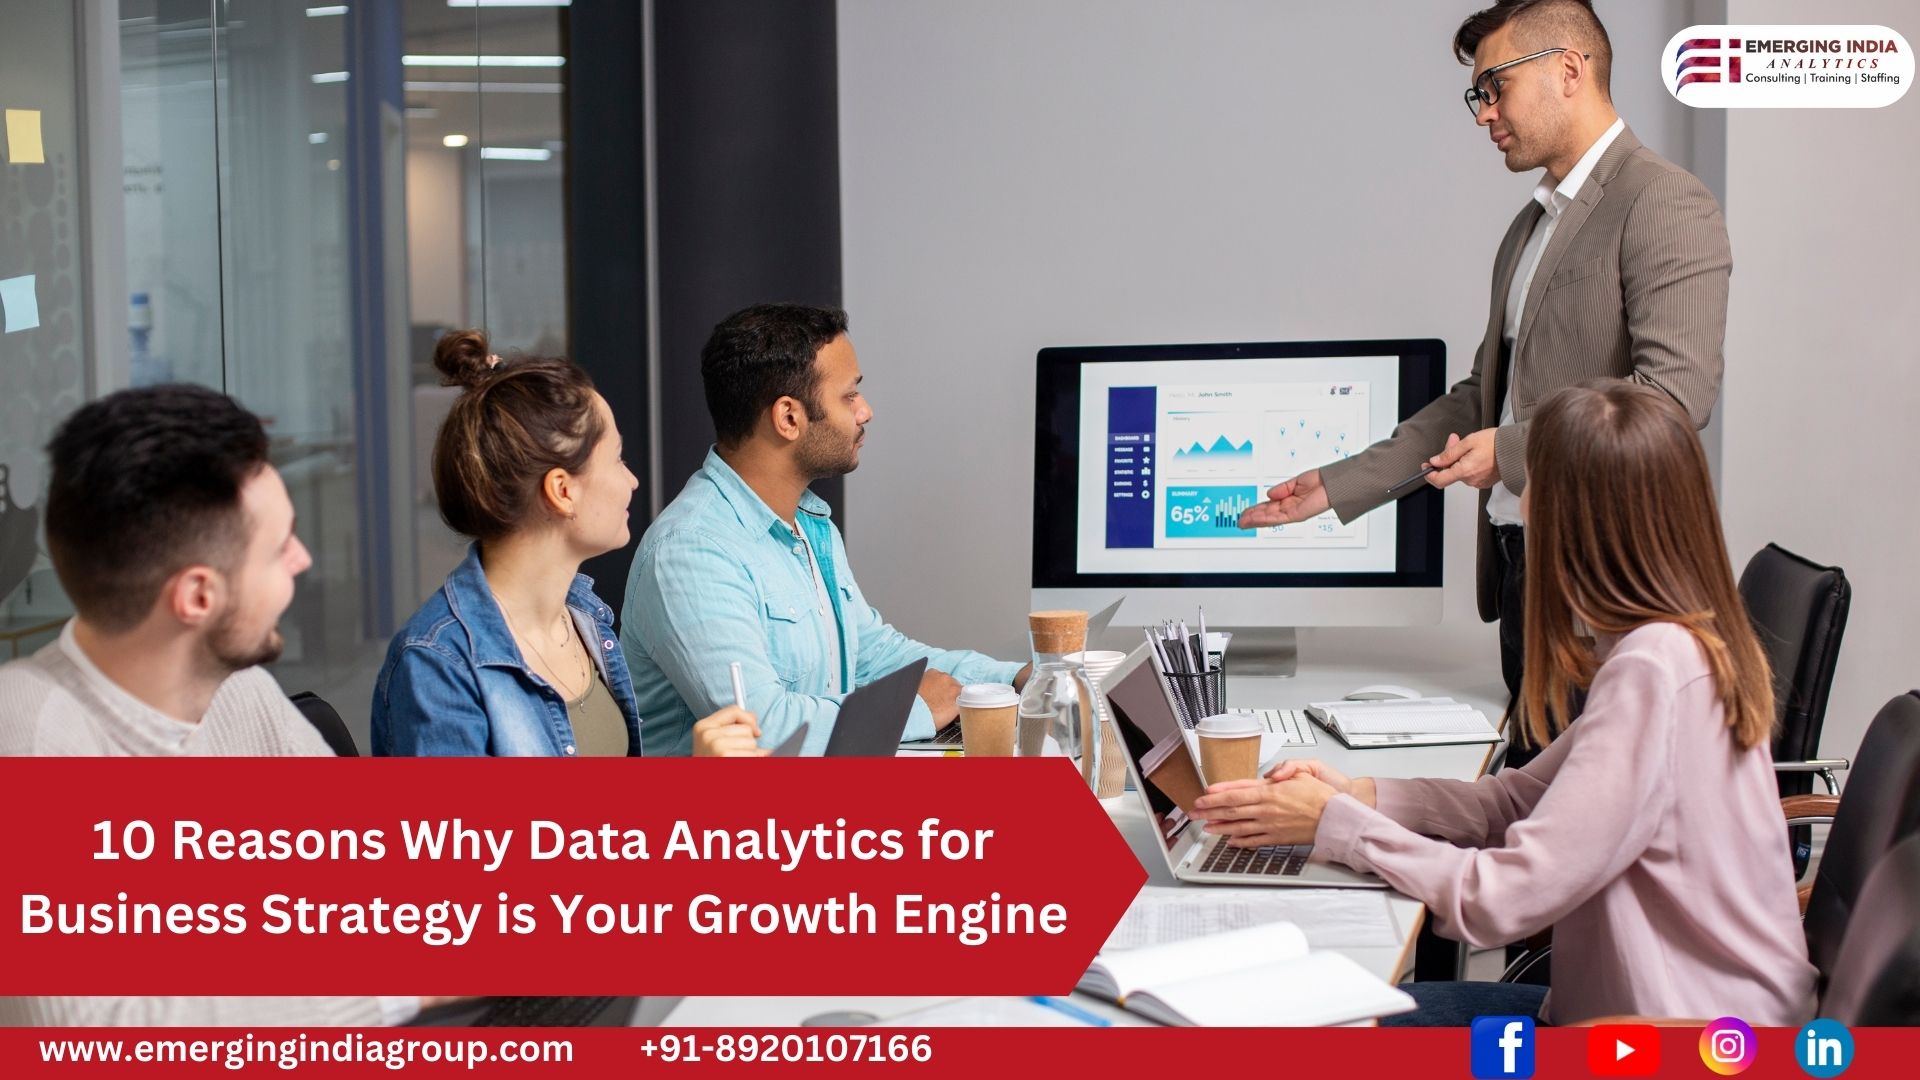 Data analytics for business strategy